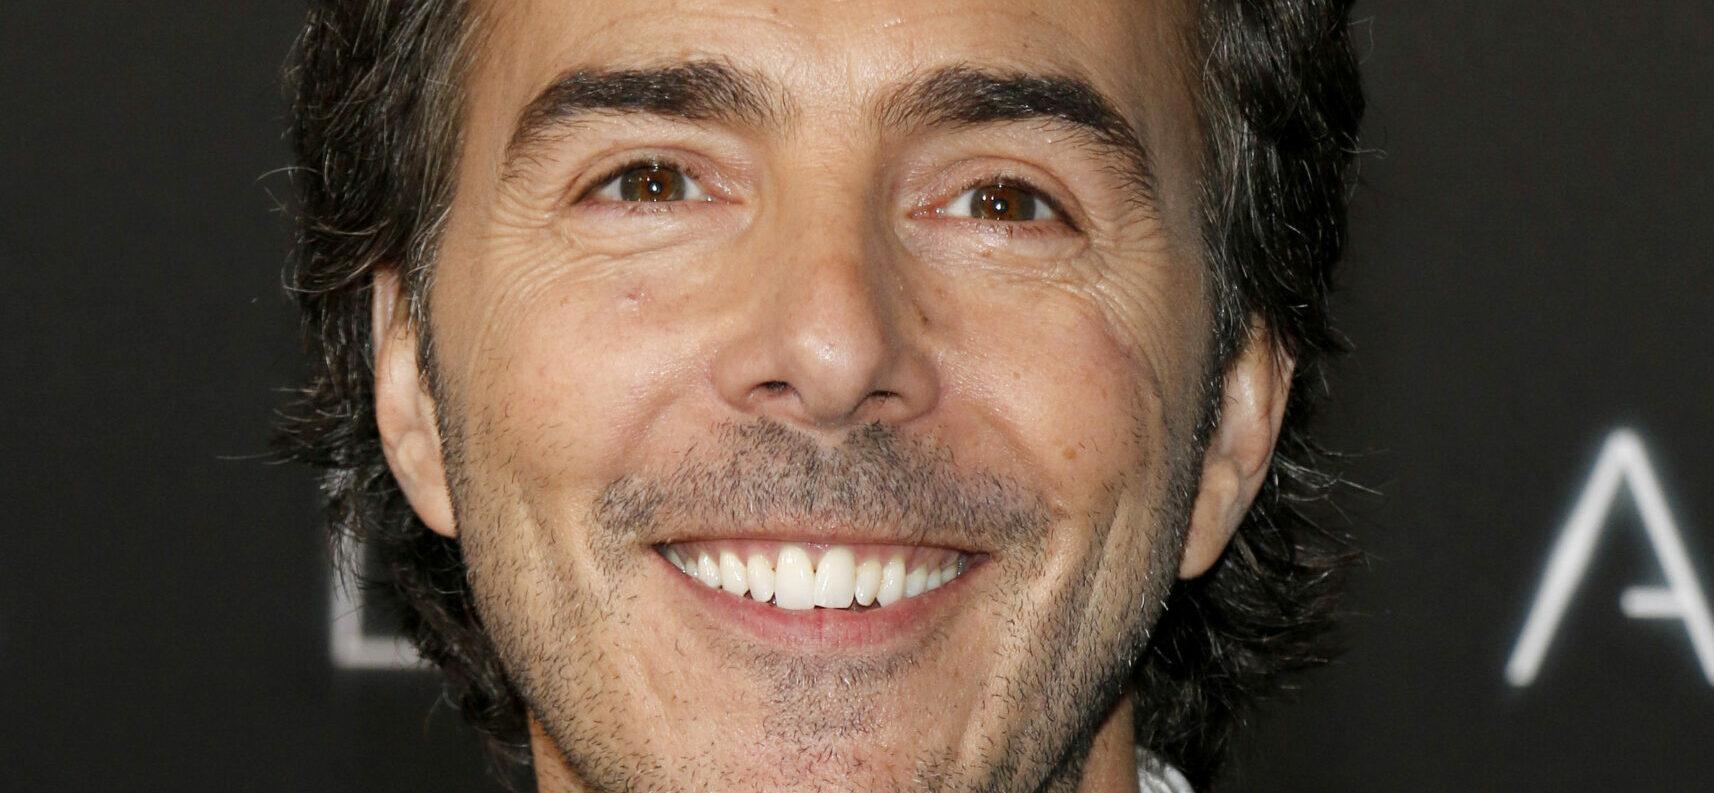 Shawn Levy at Los Angeles premiere of 'Arrival'